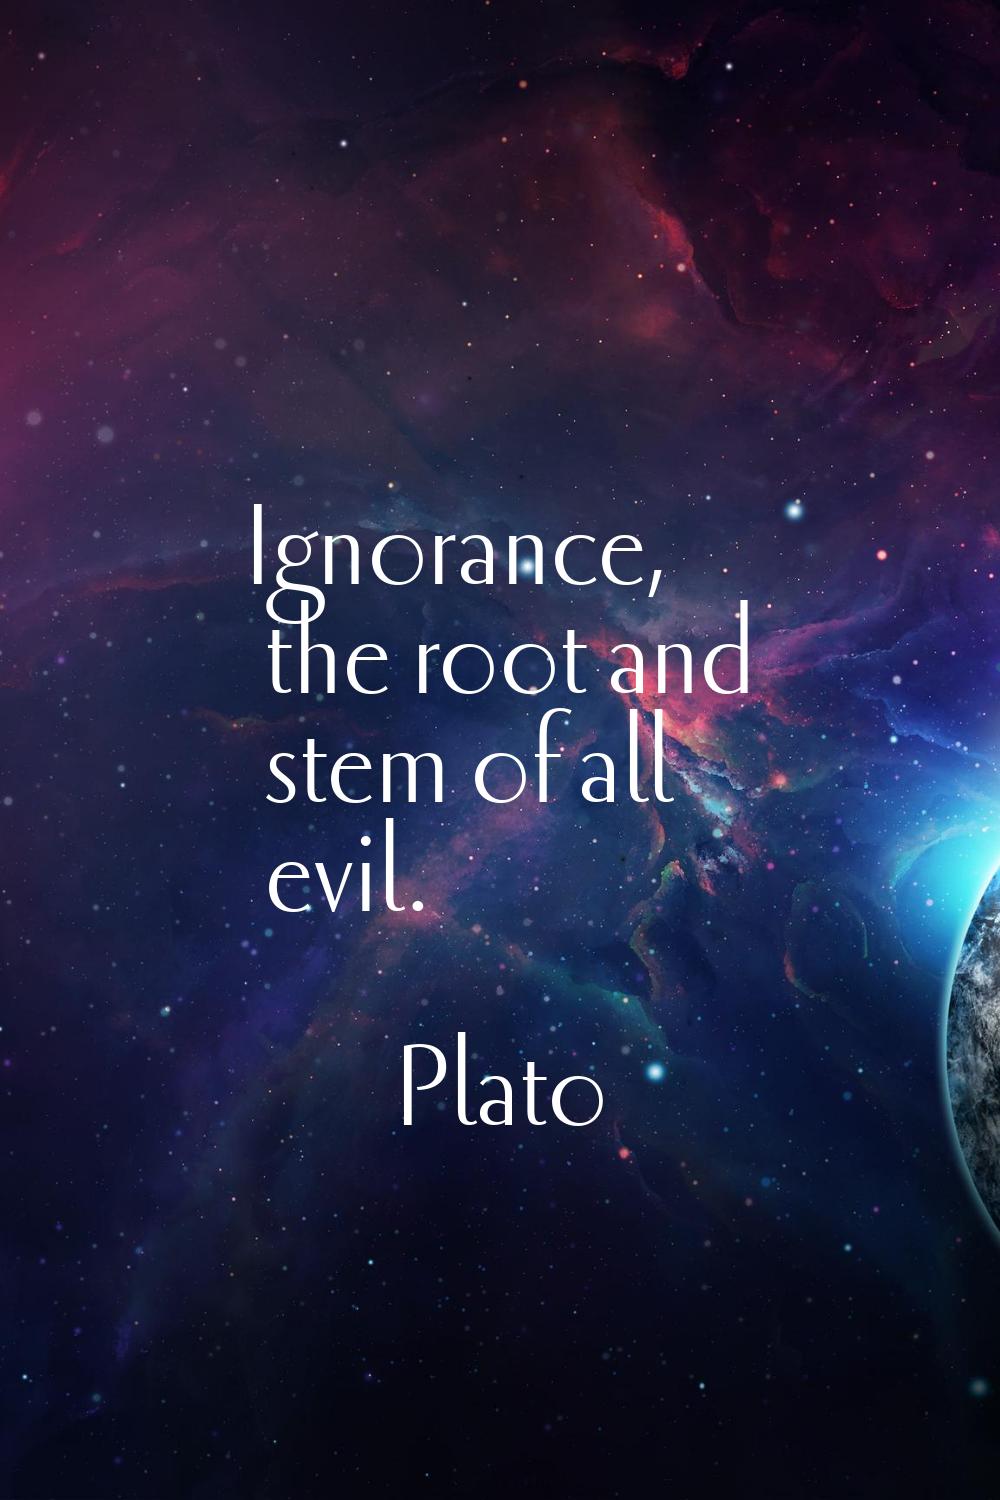 Ignorance, the root and stem of all evil.